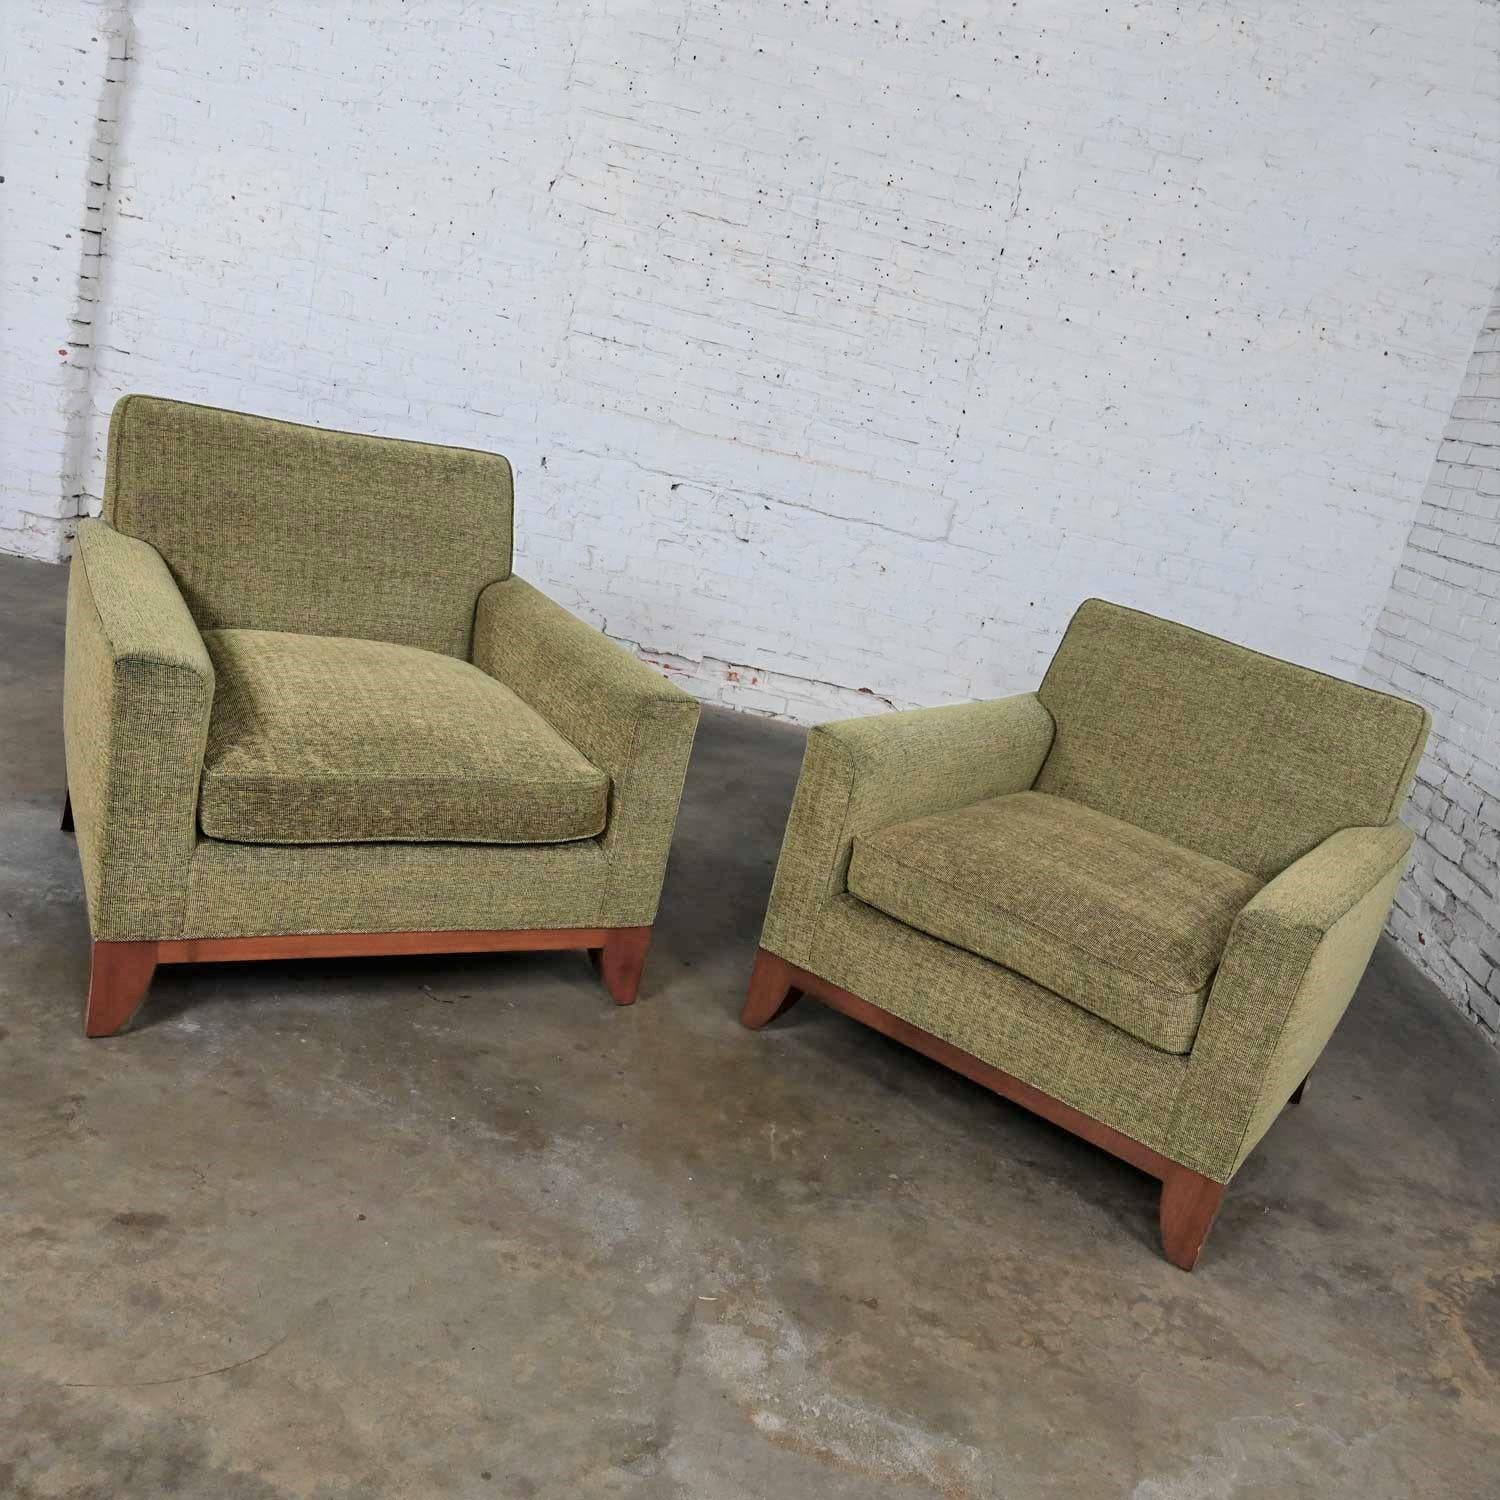 Spectacular vintage Modern custom-made Lawson style large scale club chairs khaki with olive green overtones, a pair. Comprised of upholstered frames, a feather down wrapped foam loose zippered seat cushion, square tapered legs, and light mahogany